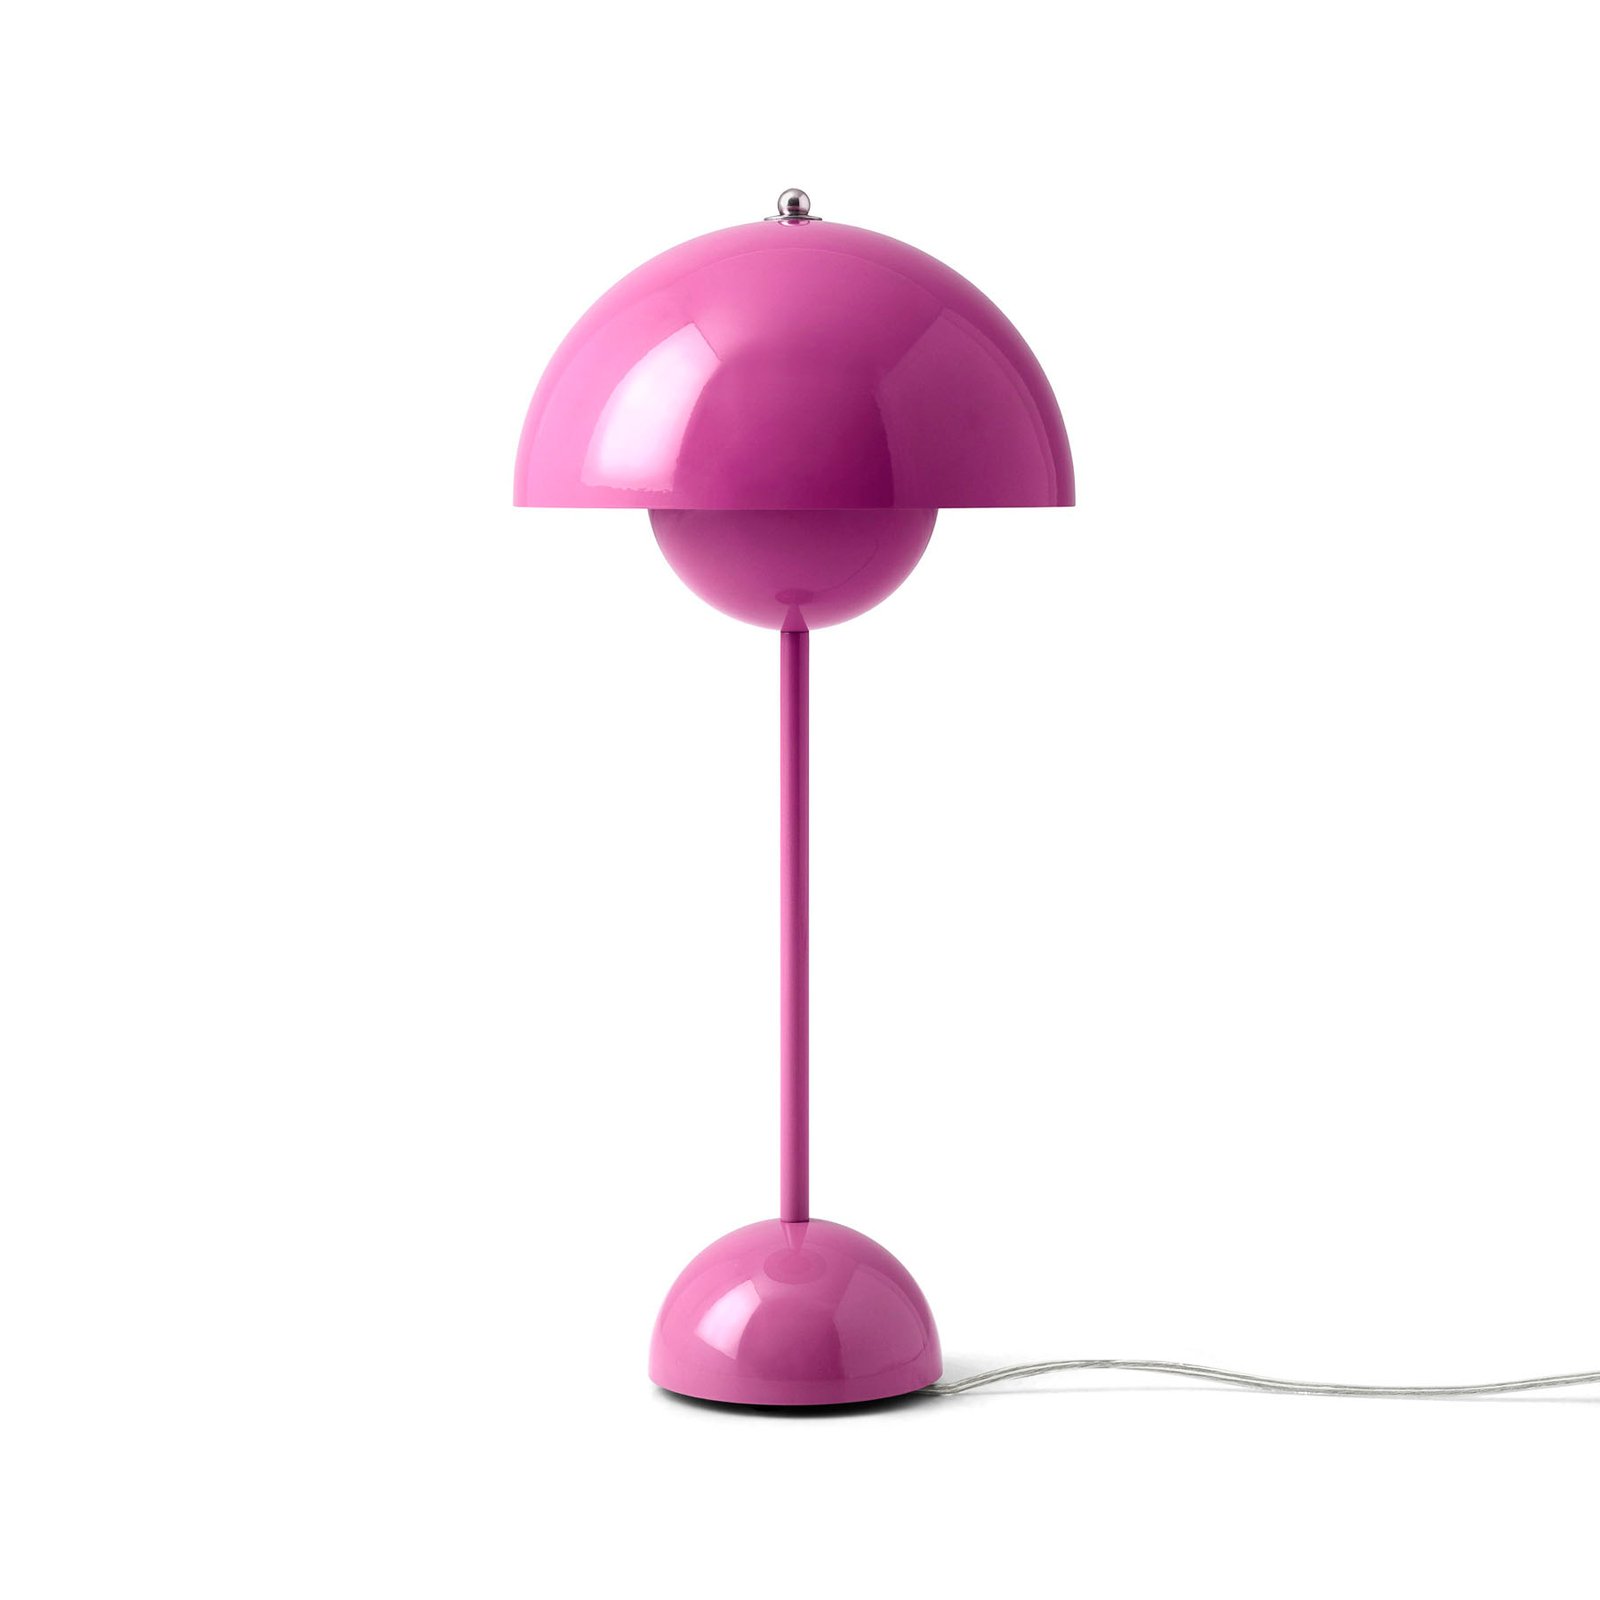 &Tradition Flowerpot VP3 table lamp, pink